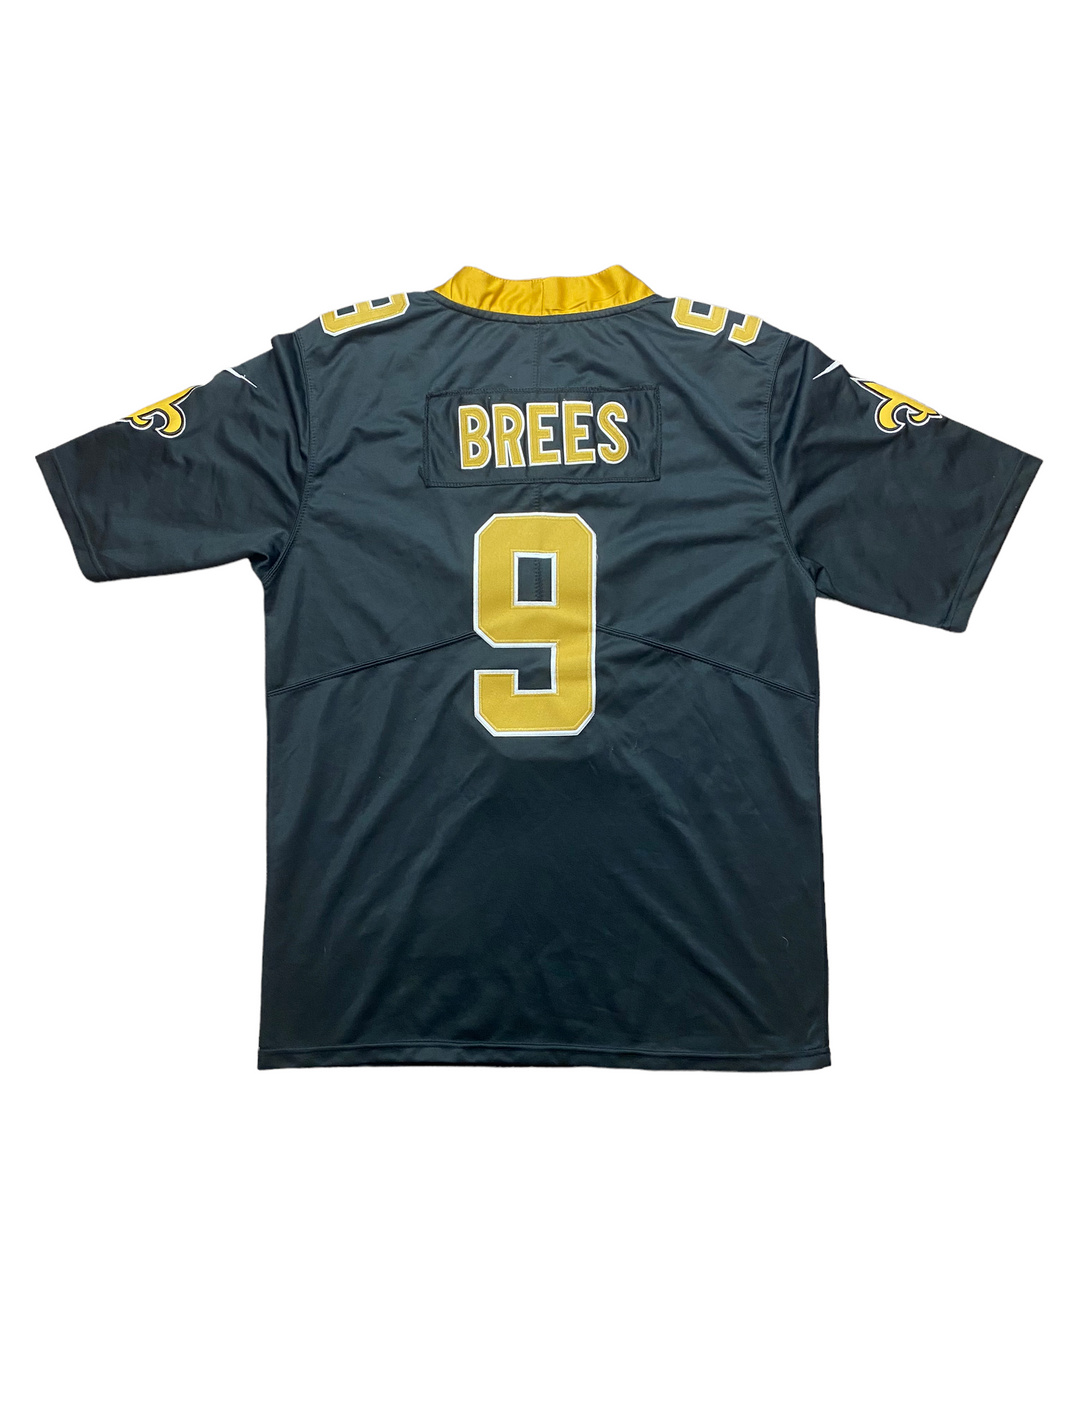 Nike NFL Jersey New Orleans Saints Brees No. 9